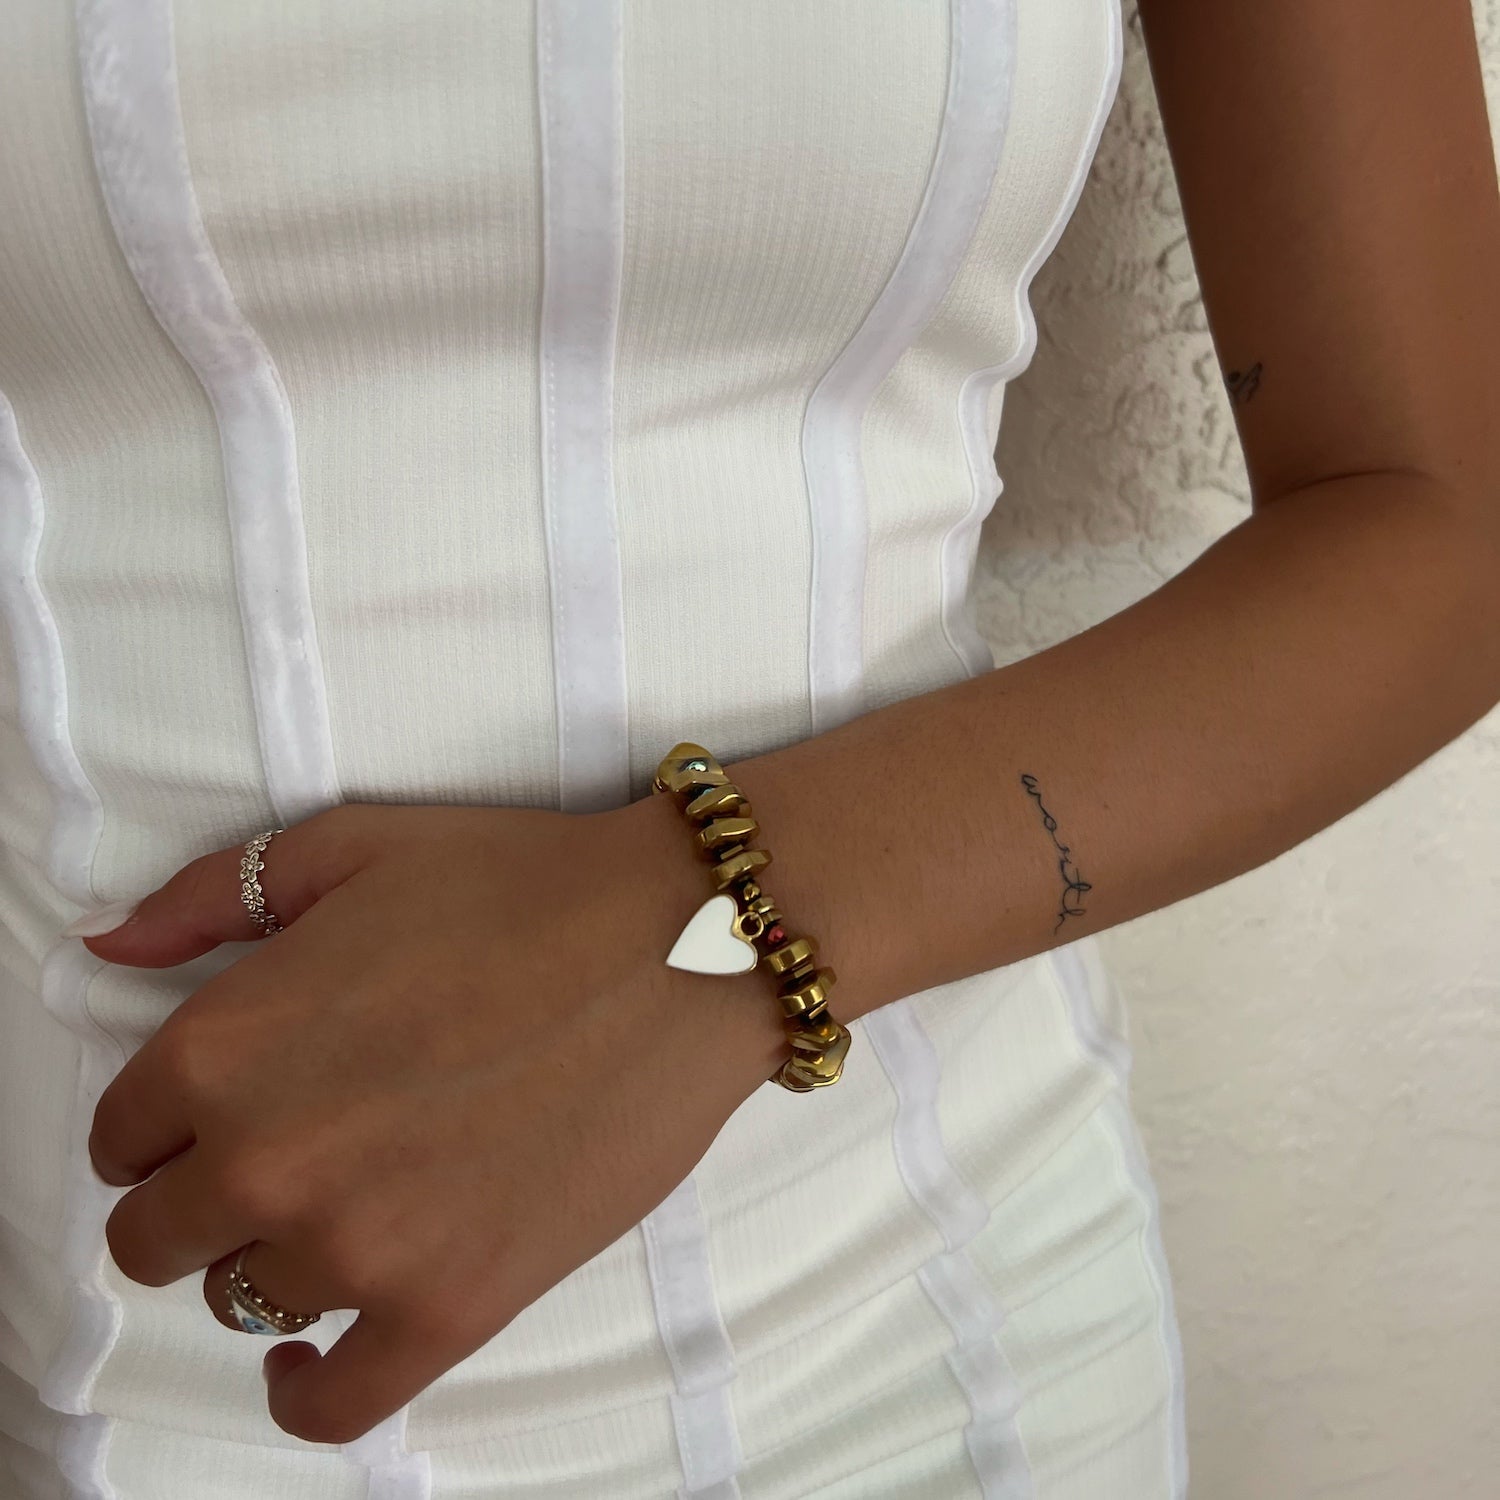 With the White Corazon Bracelet, the hand model exudes a sense of style and warmth, showcasing the charm's white enamel heart design.